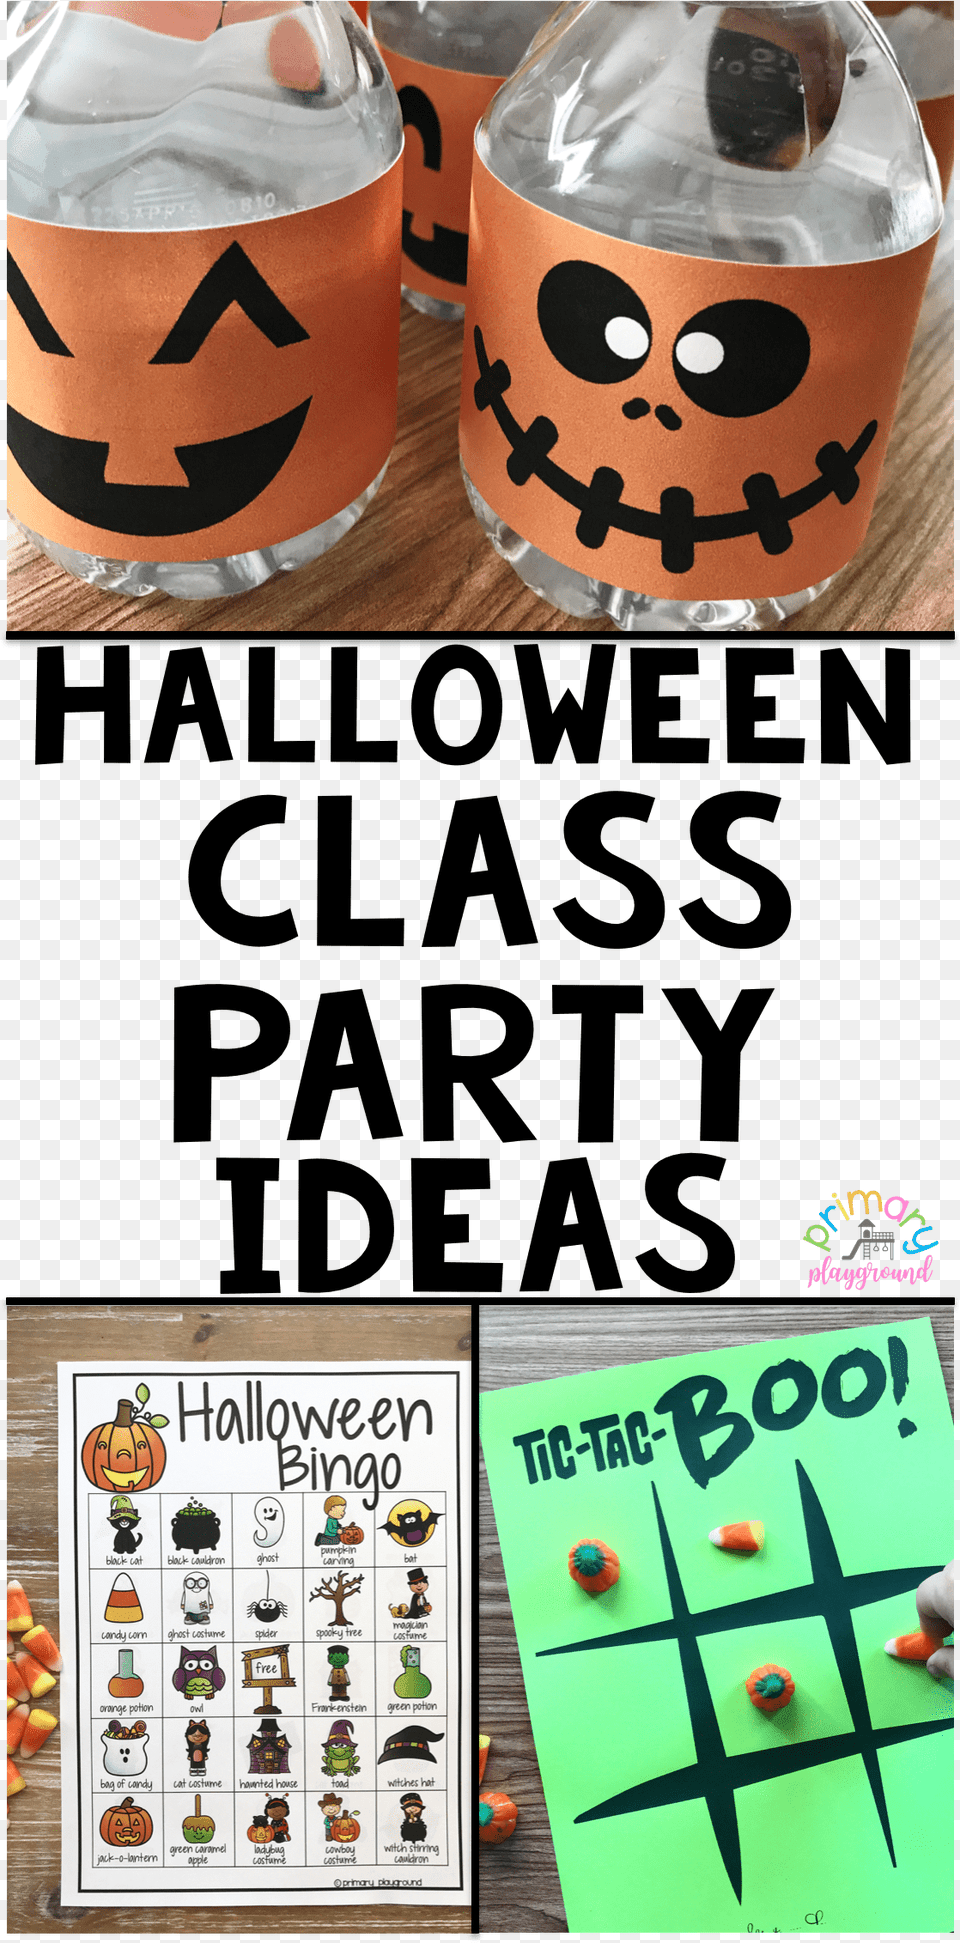 Halloween Party Poster, Alcohol, Beer, Beverage, Text Png Image